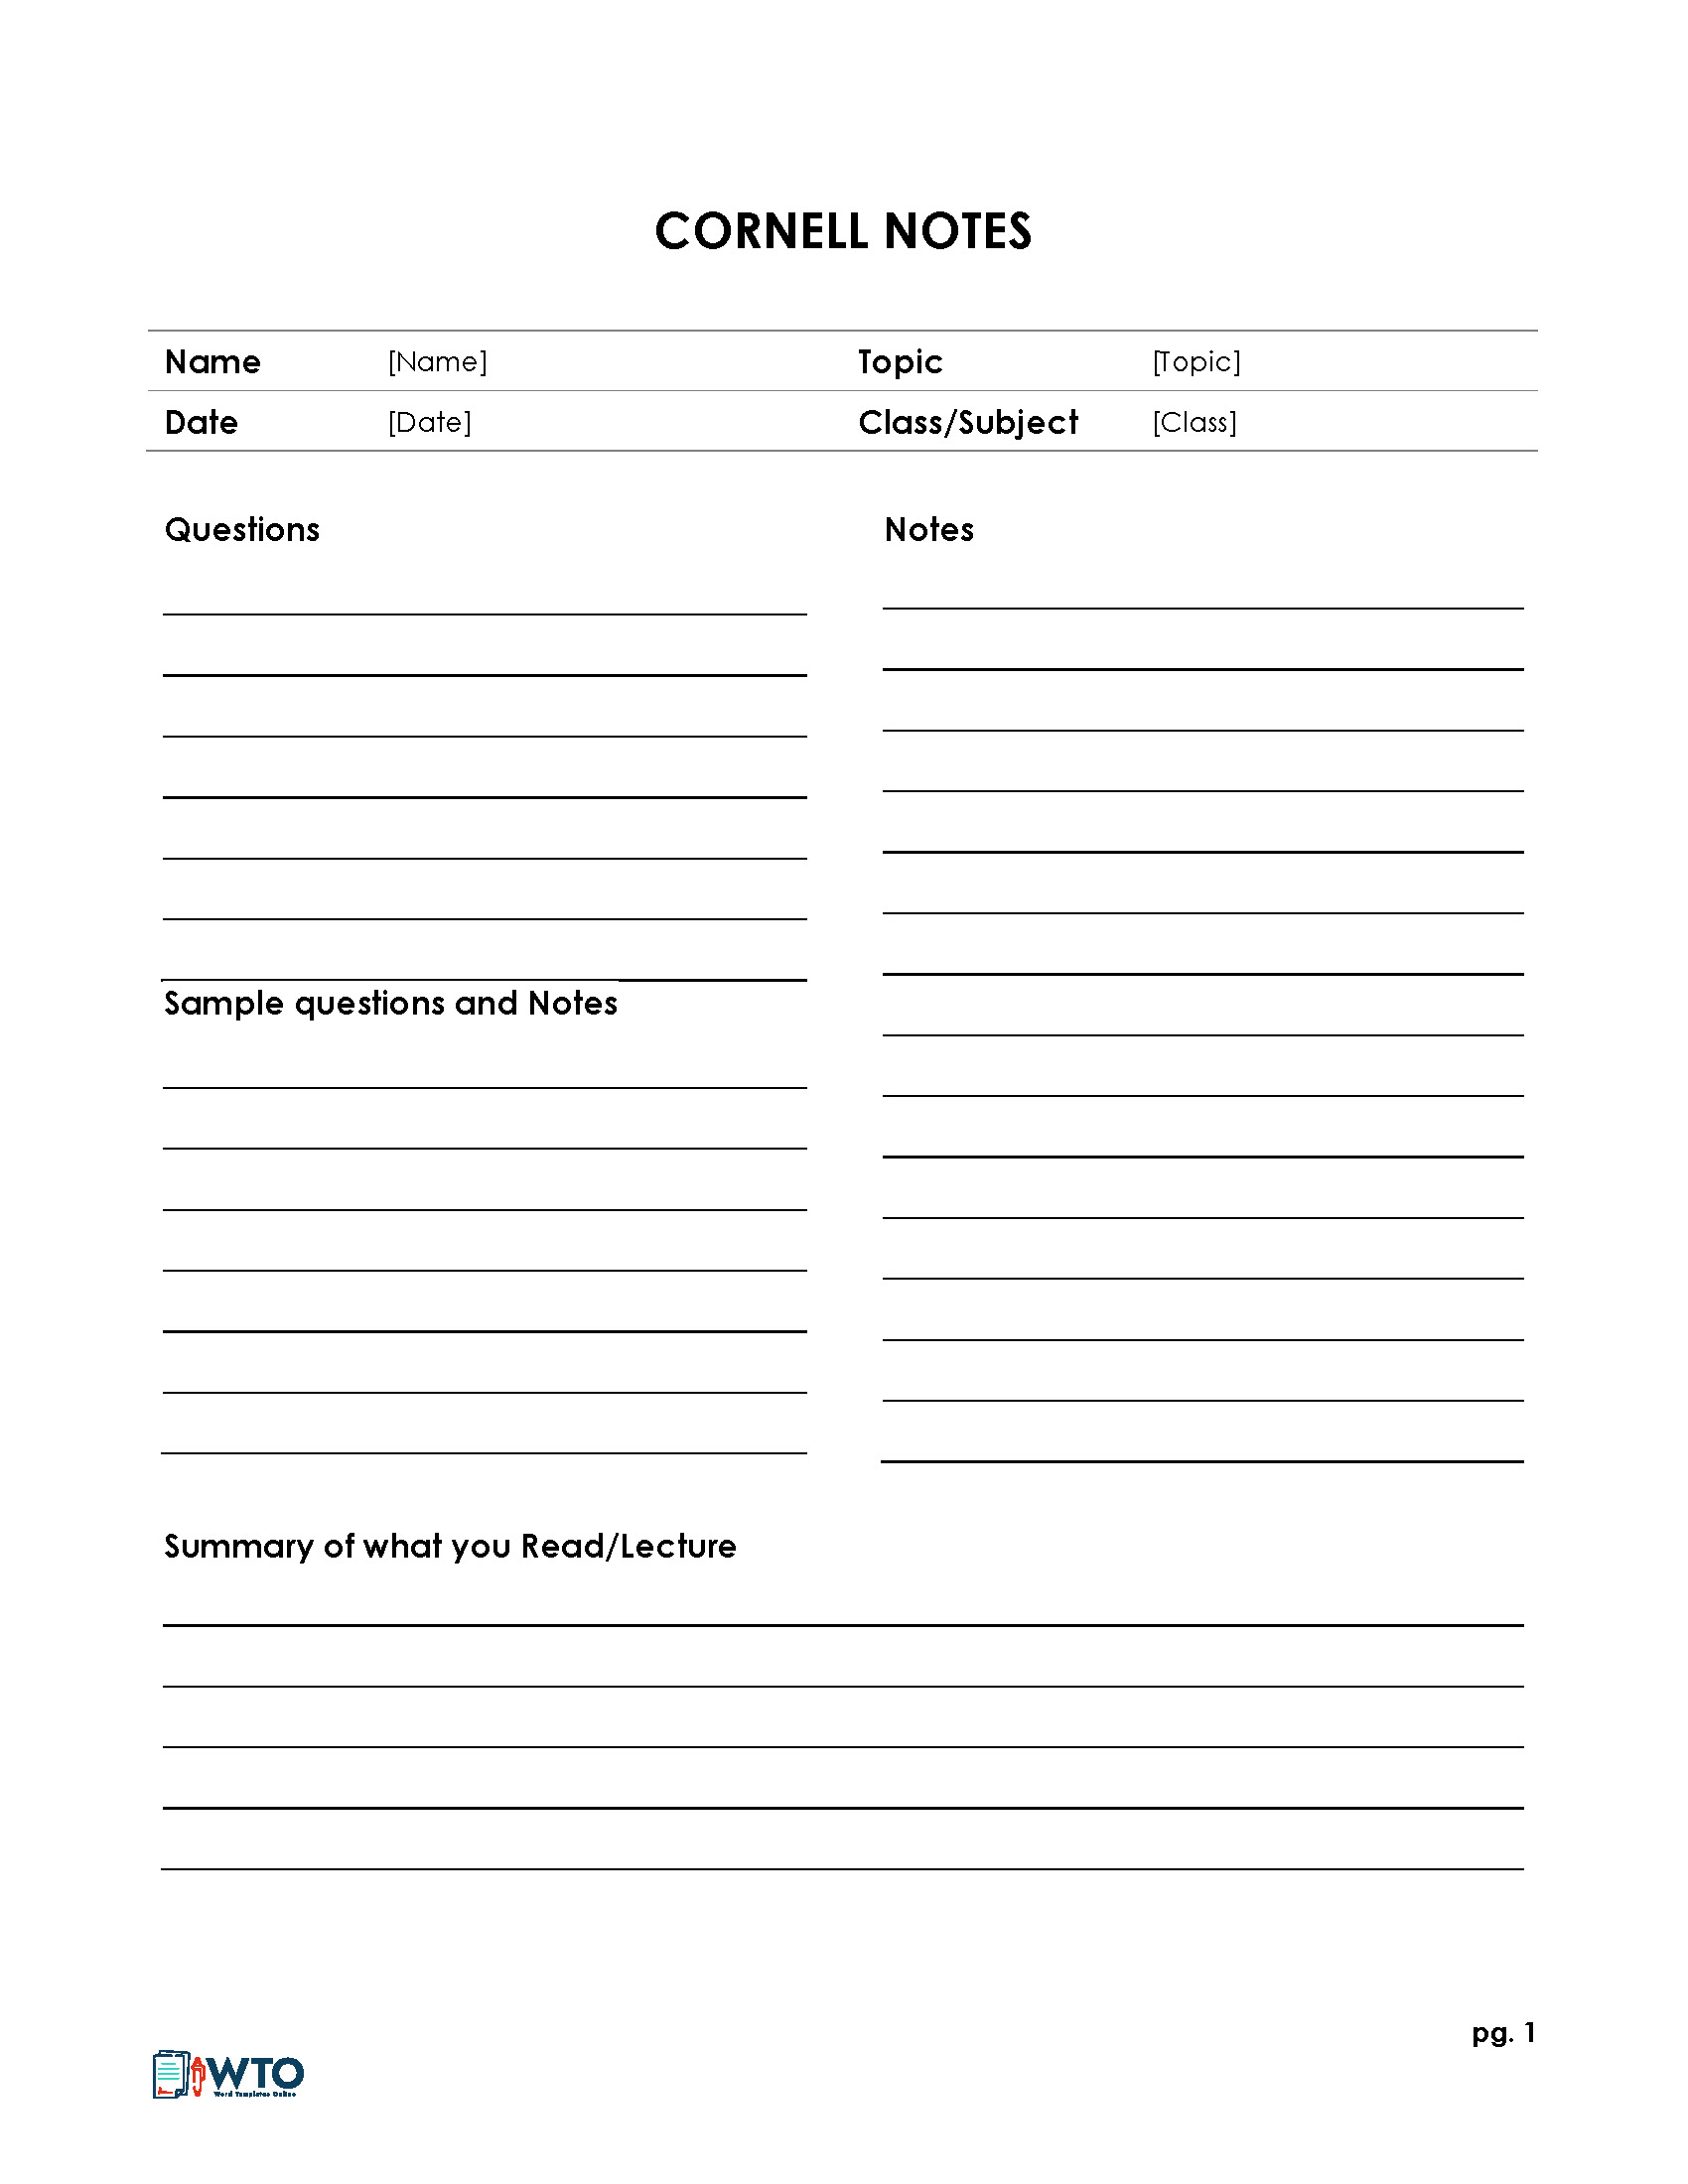 22 Free Cornell Note Templates (Cornell Note Taking Explained) Within 3 Column Notes Template